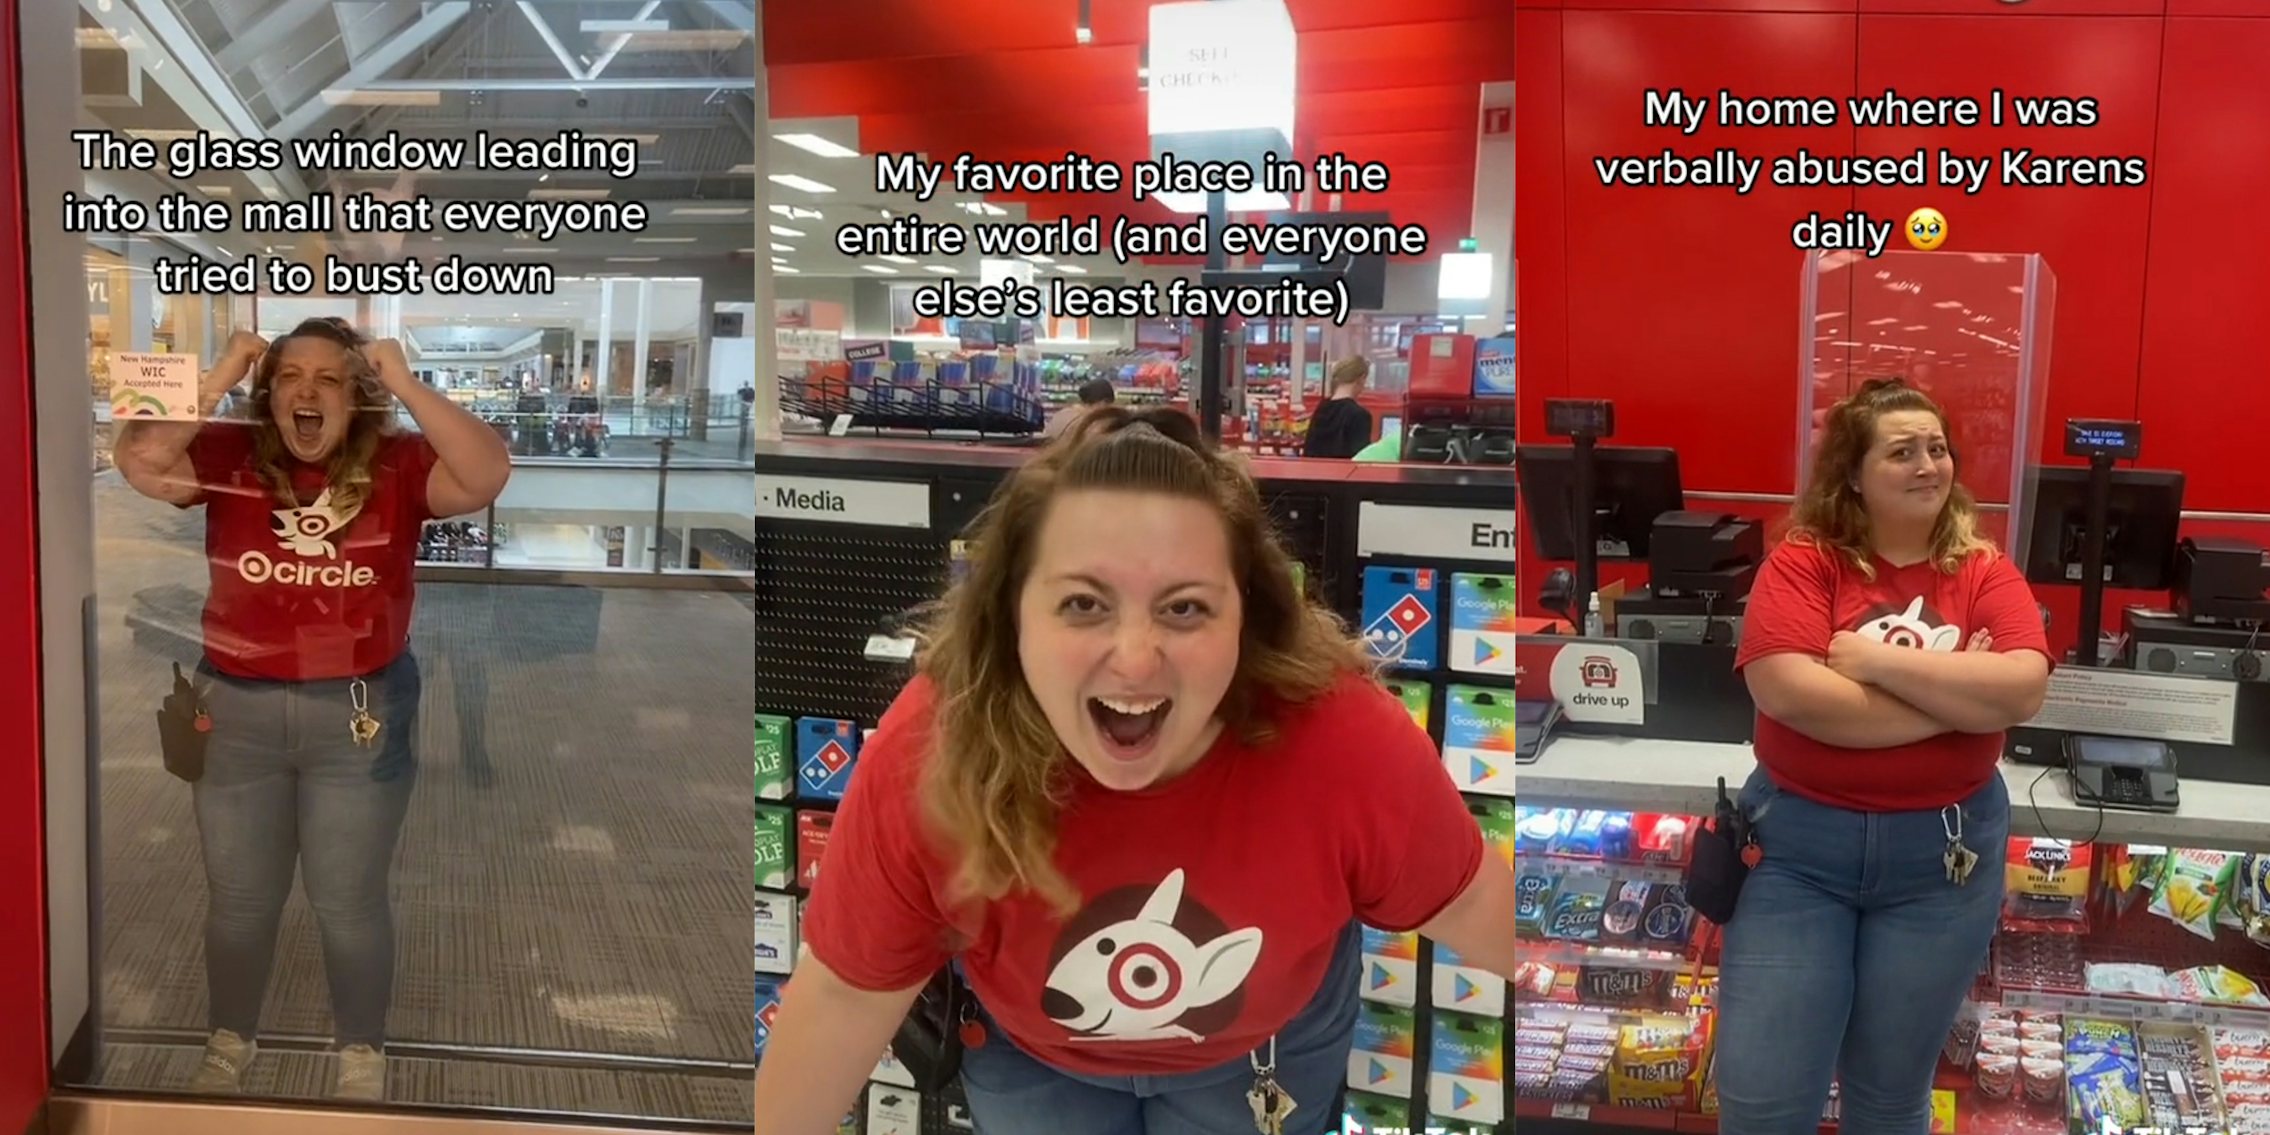 woman pounding on glass window with caption 'The glass window leading into the mall that everyone tried to bust down' (l) woman in Target shirt happily shouting with caption 'my favorite place in the entire world (and everyone else's least favorite)' (c) woman with arms crossed and caption 'my home where I was verbally abused by Karens daily' (r)